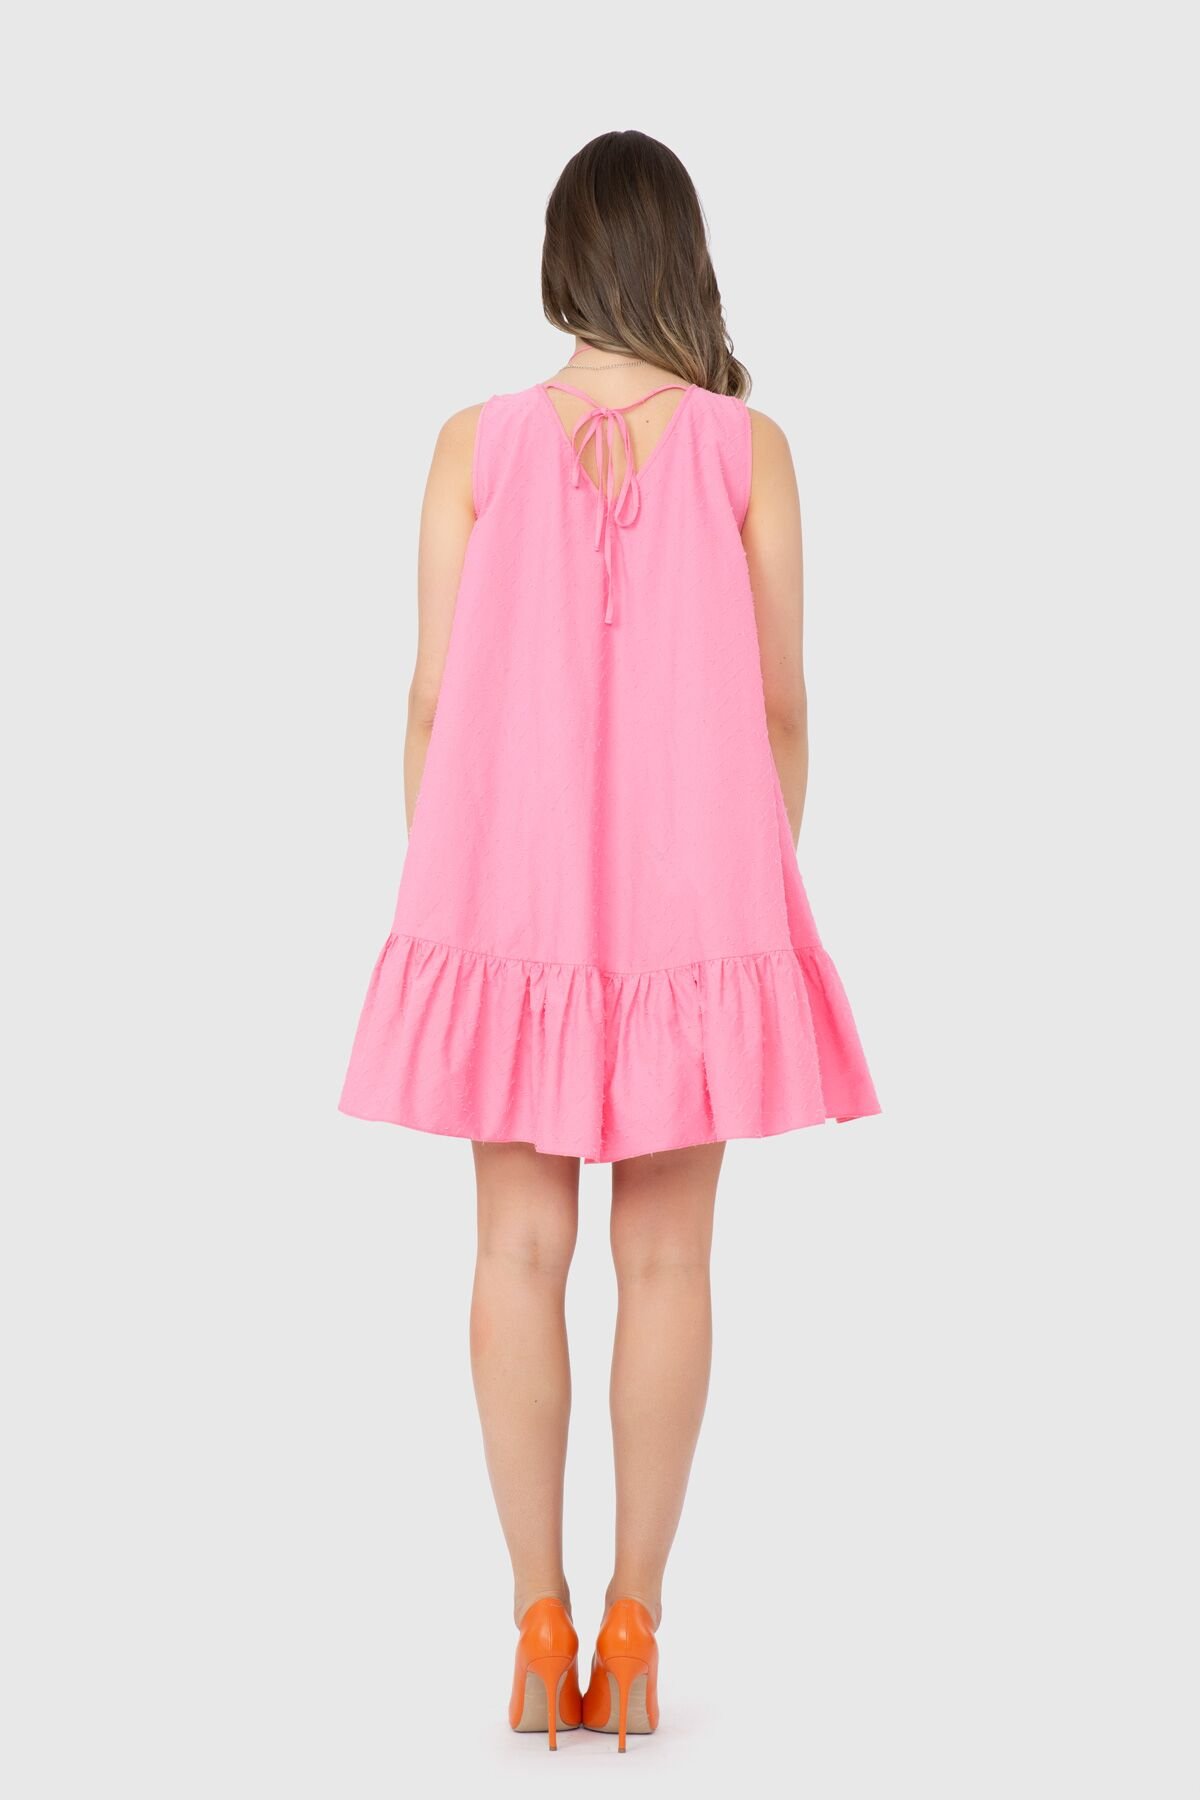 Necklace Detailed Ruffle Pink Mini Dress